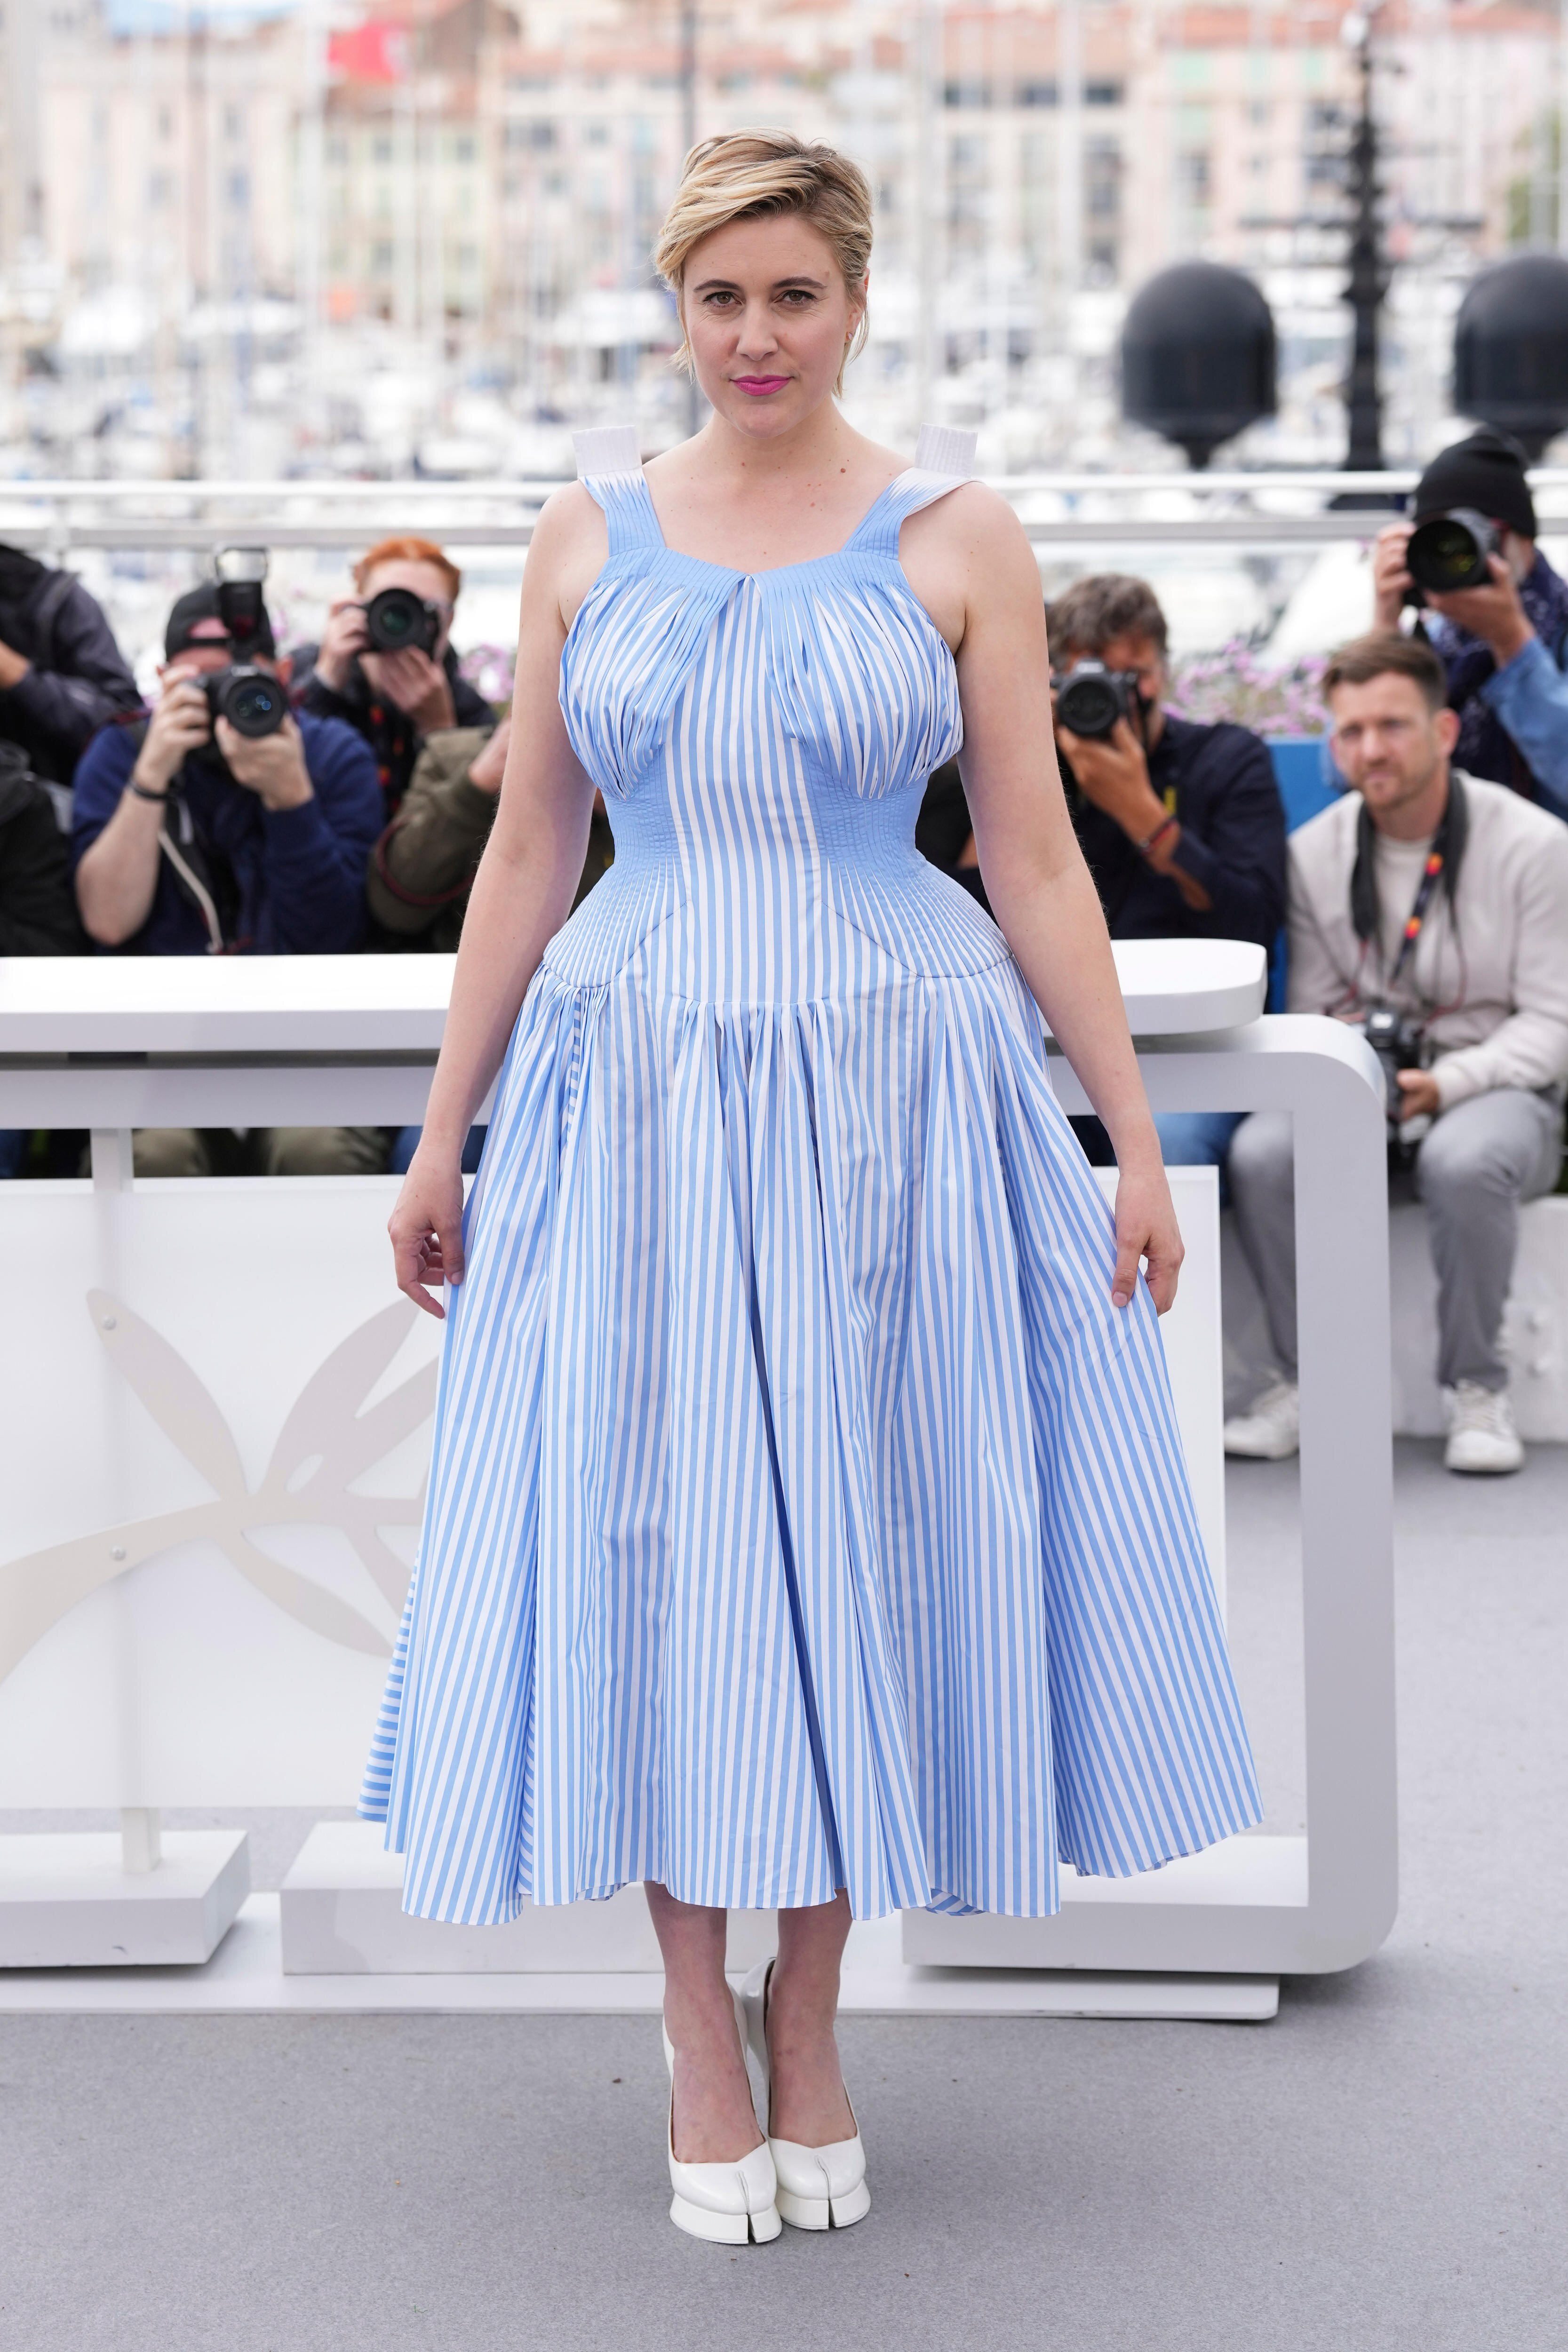 Greta Gerwig wearing a blue and white striped dress with corset-like detailing and a pair of white split-toed heels